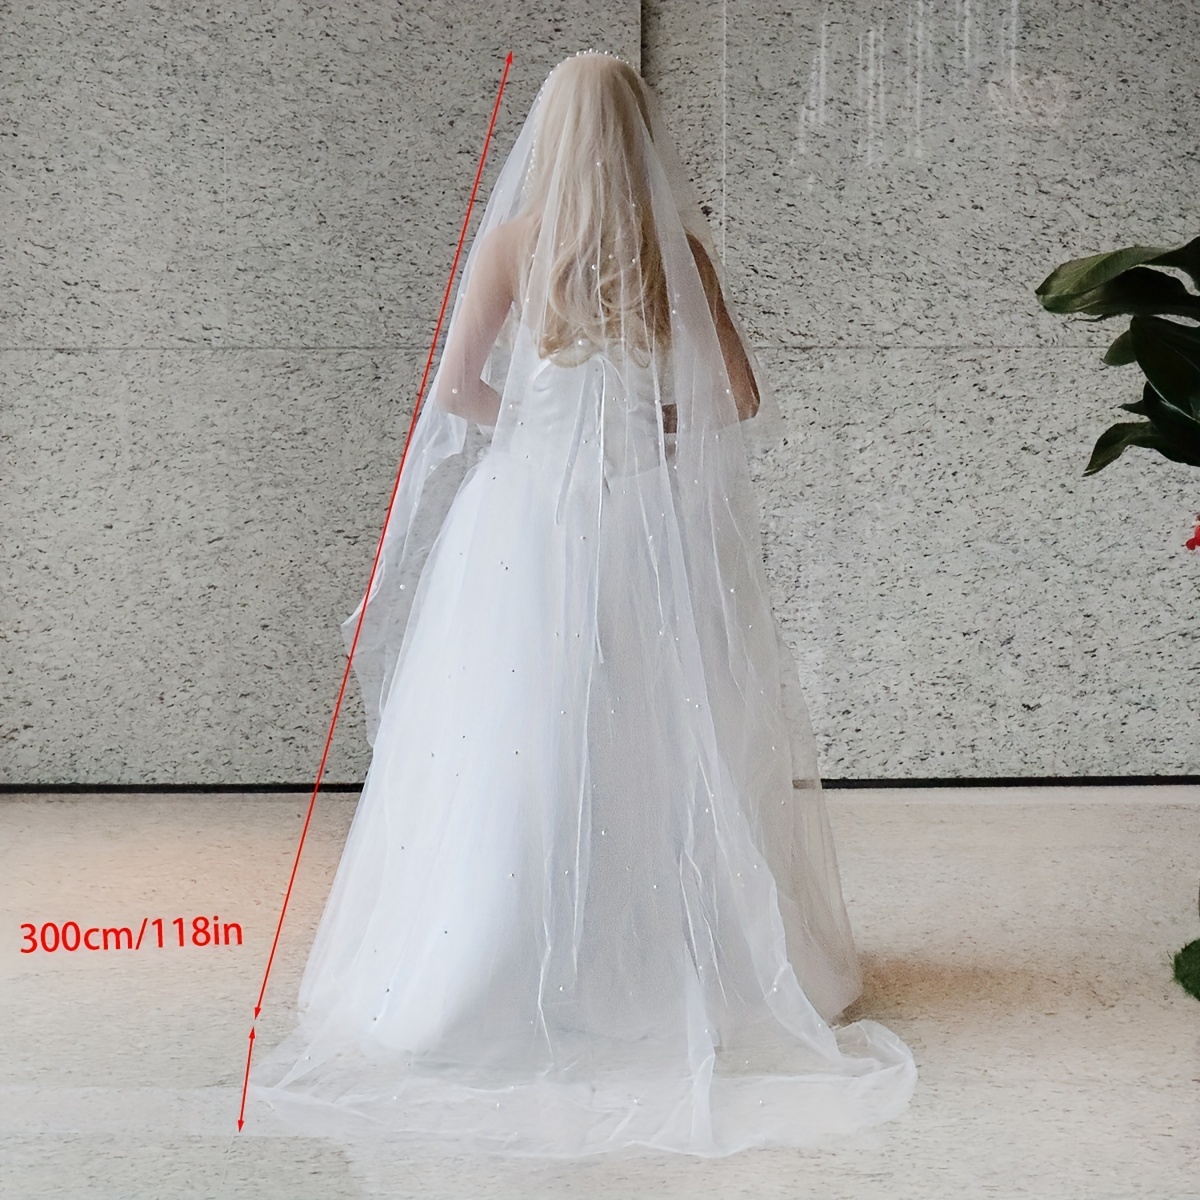 1pc Bridal Veil Comb With Beaded Edge, 3 Meters Width For Wedding Ceremony